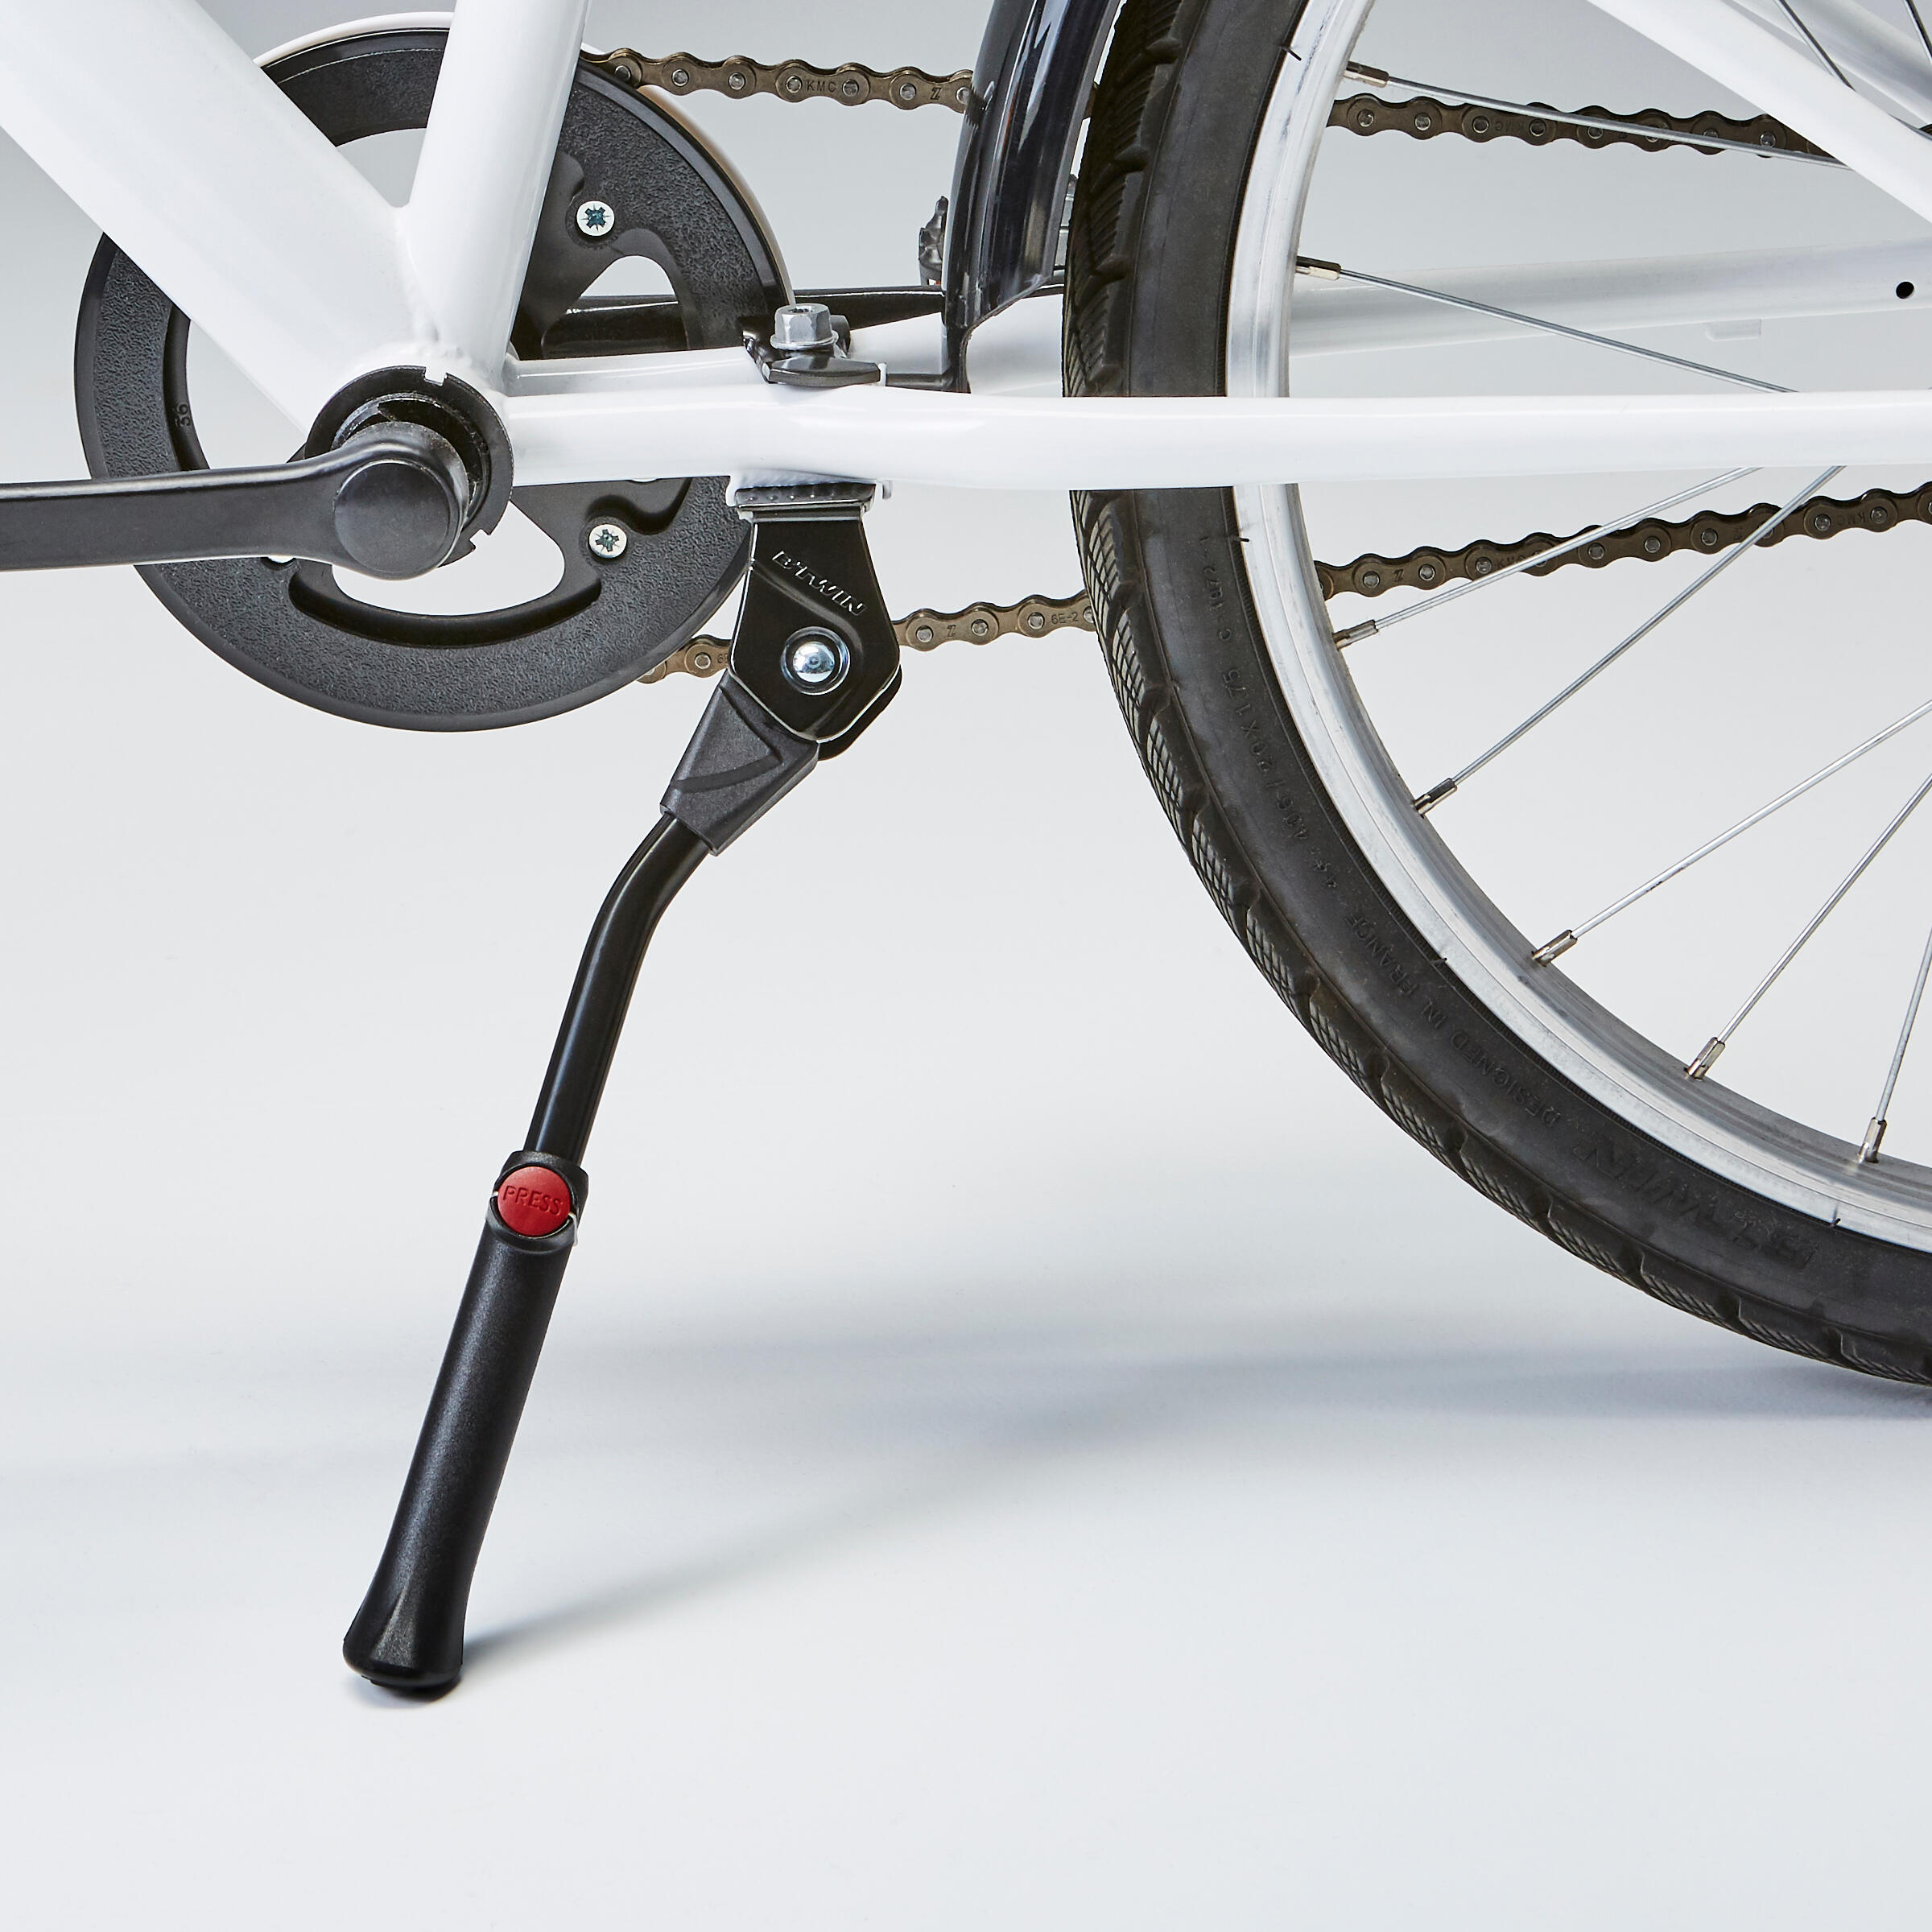 decathlon cycle stand